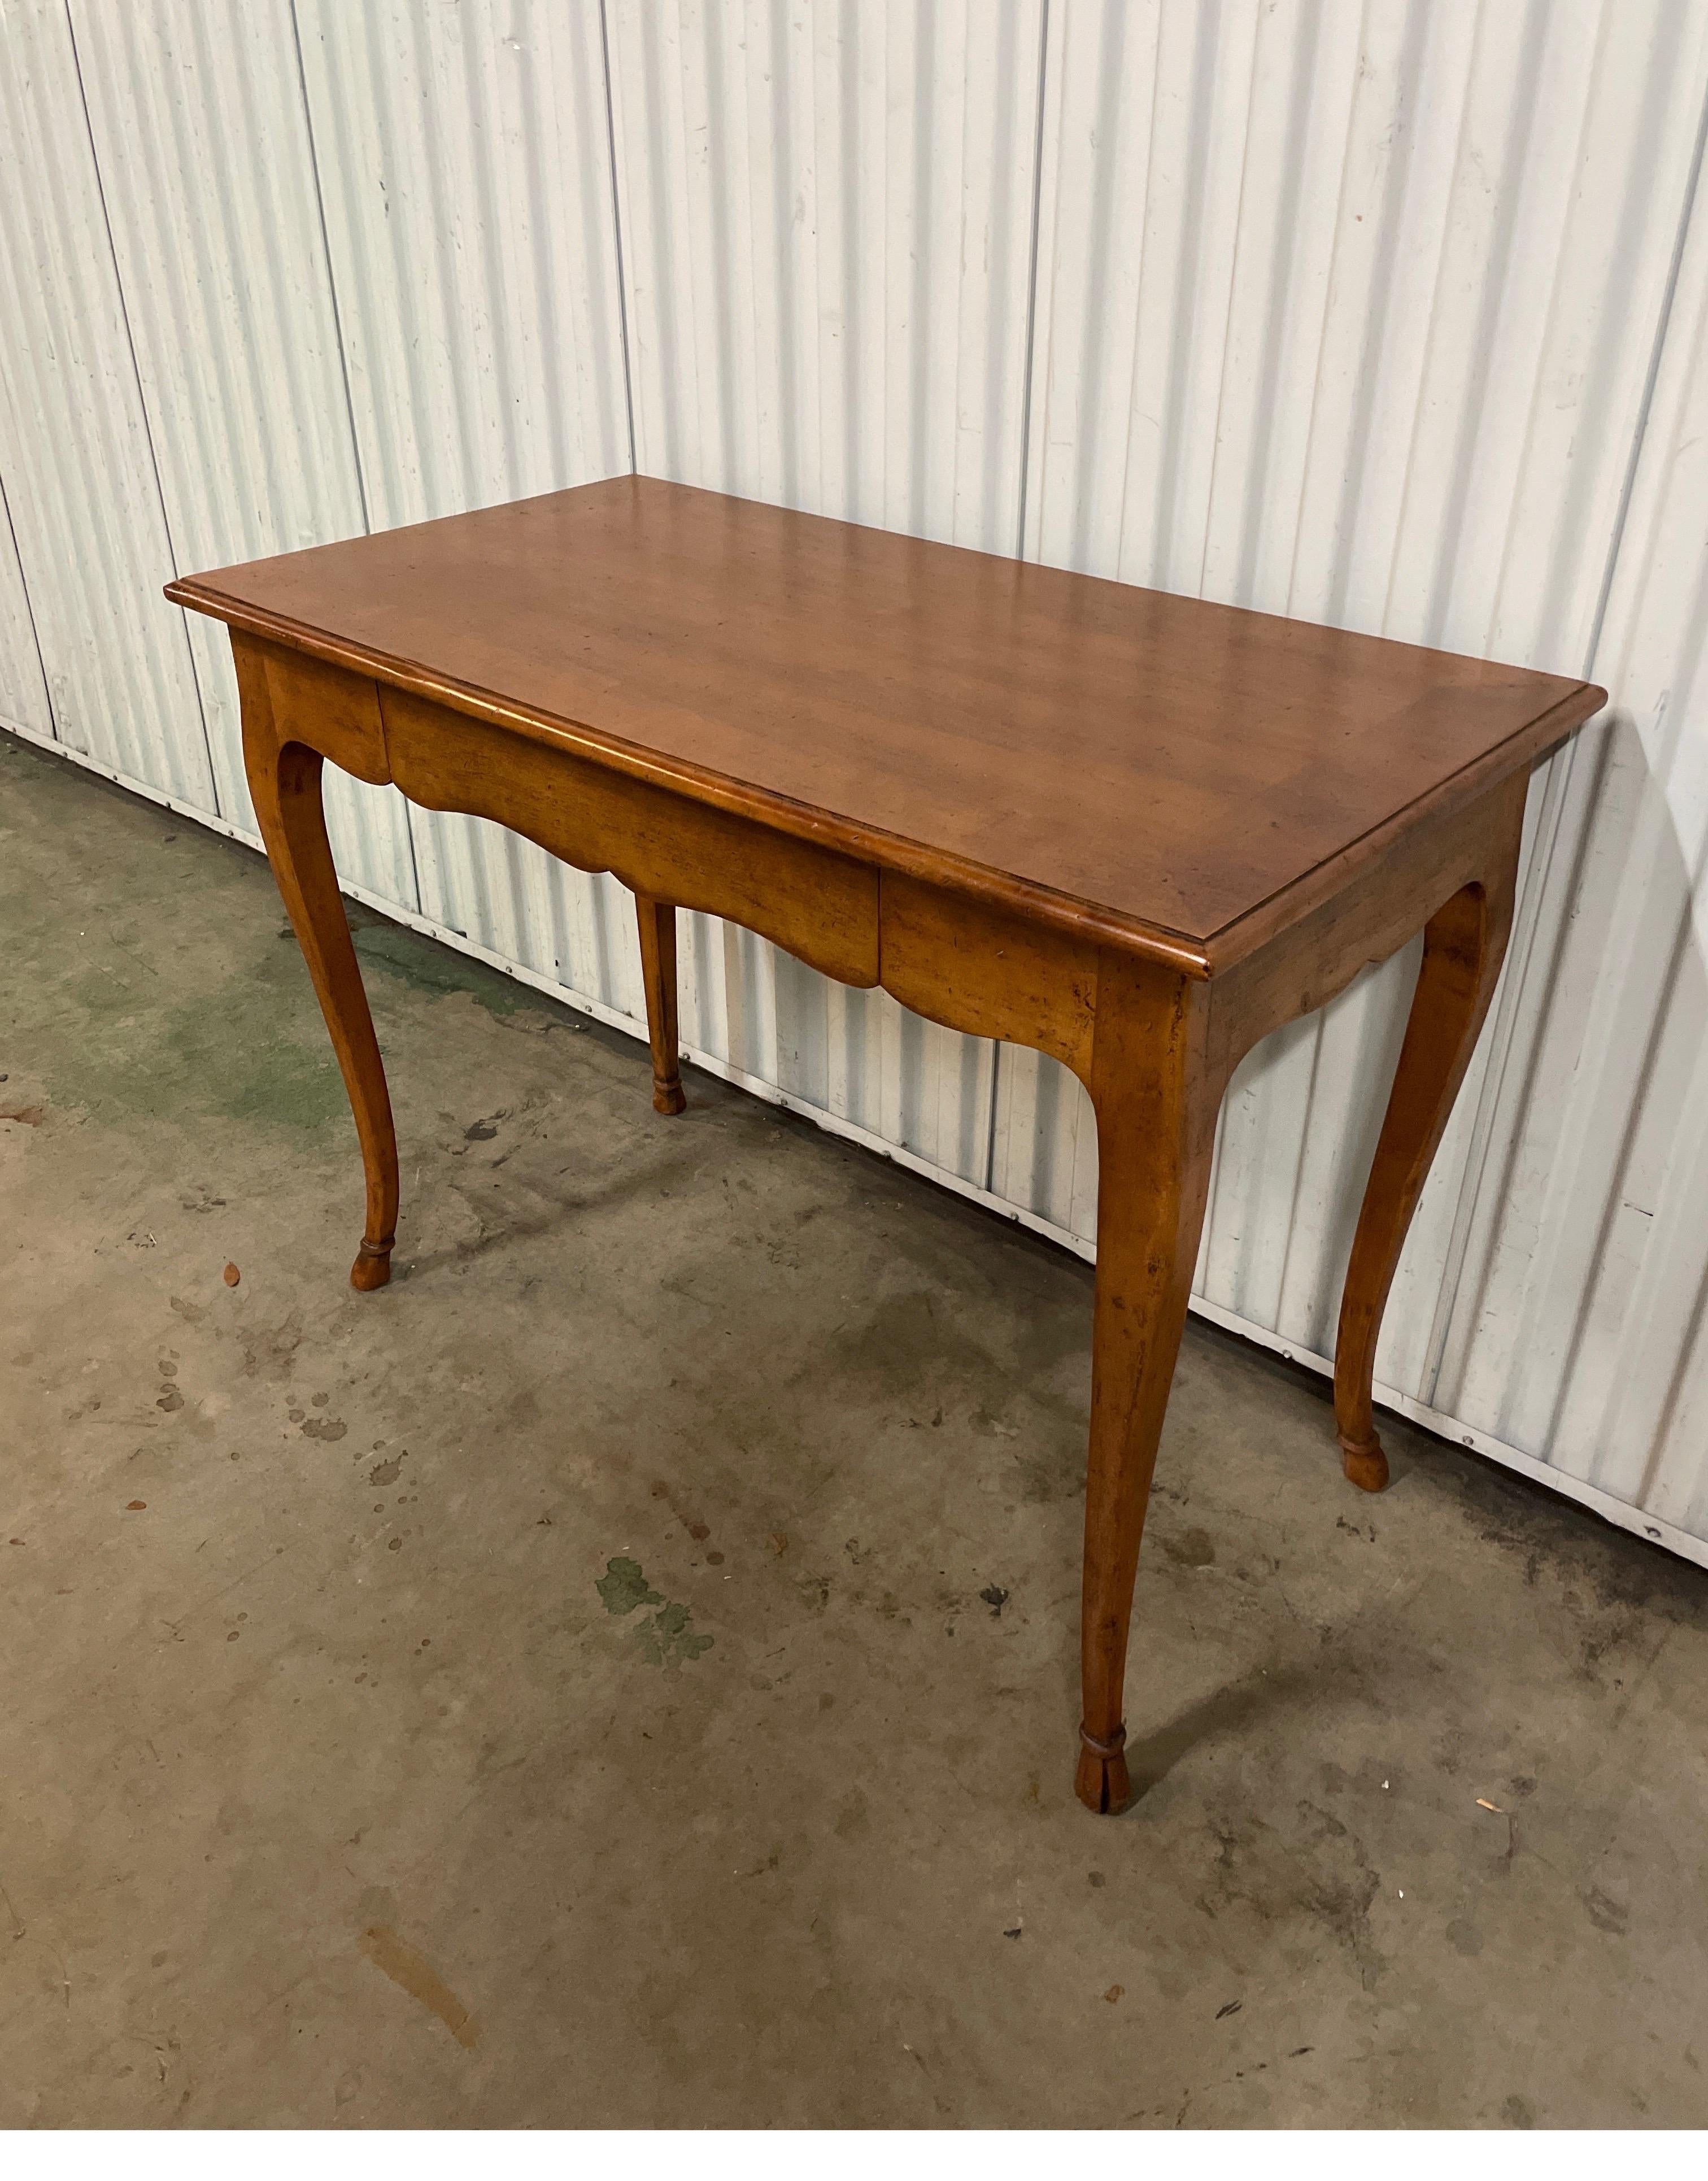 Country French style desk with hoof feet & one lined drawer. This smaller scale desk can be used in a variety of settings.